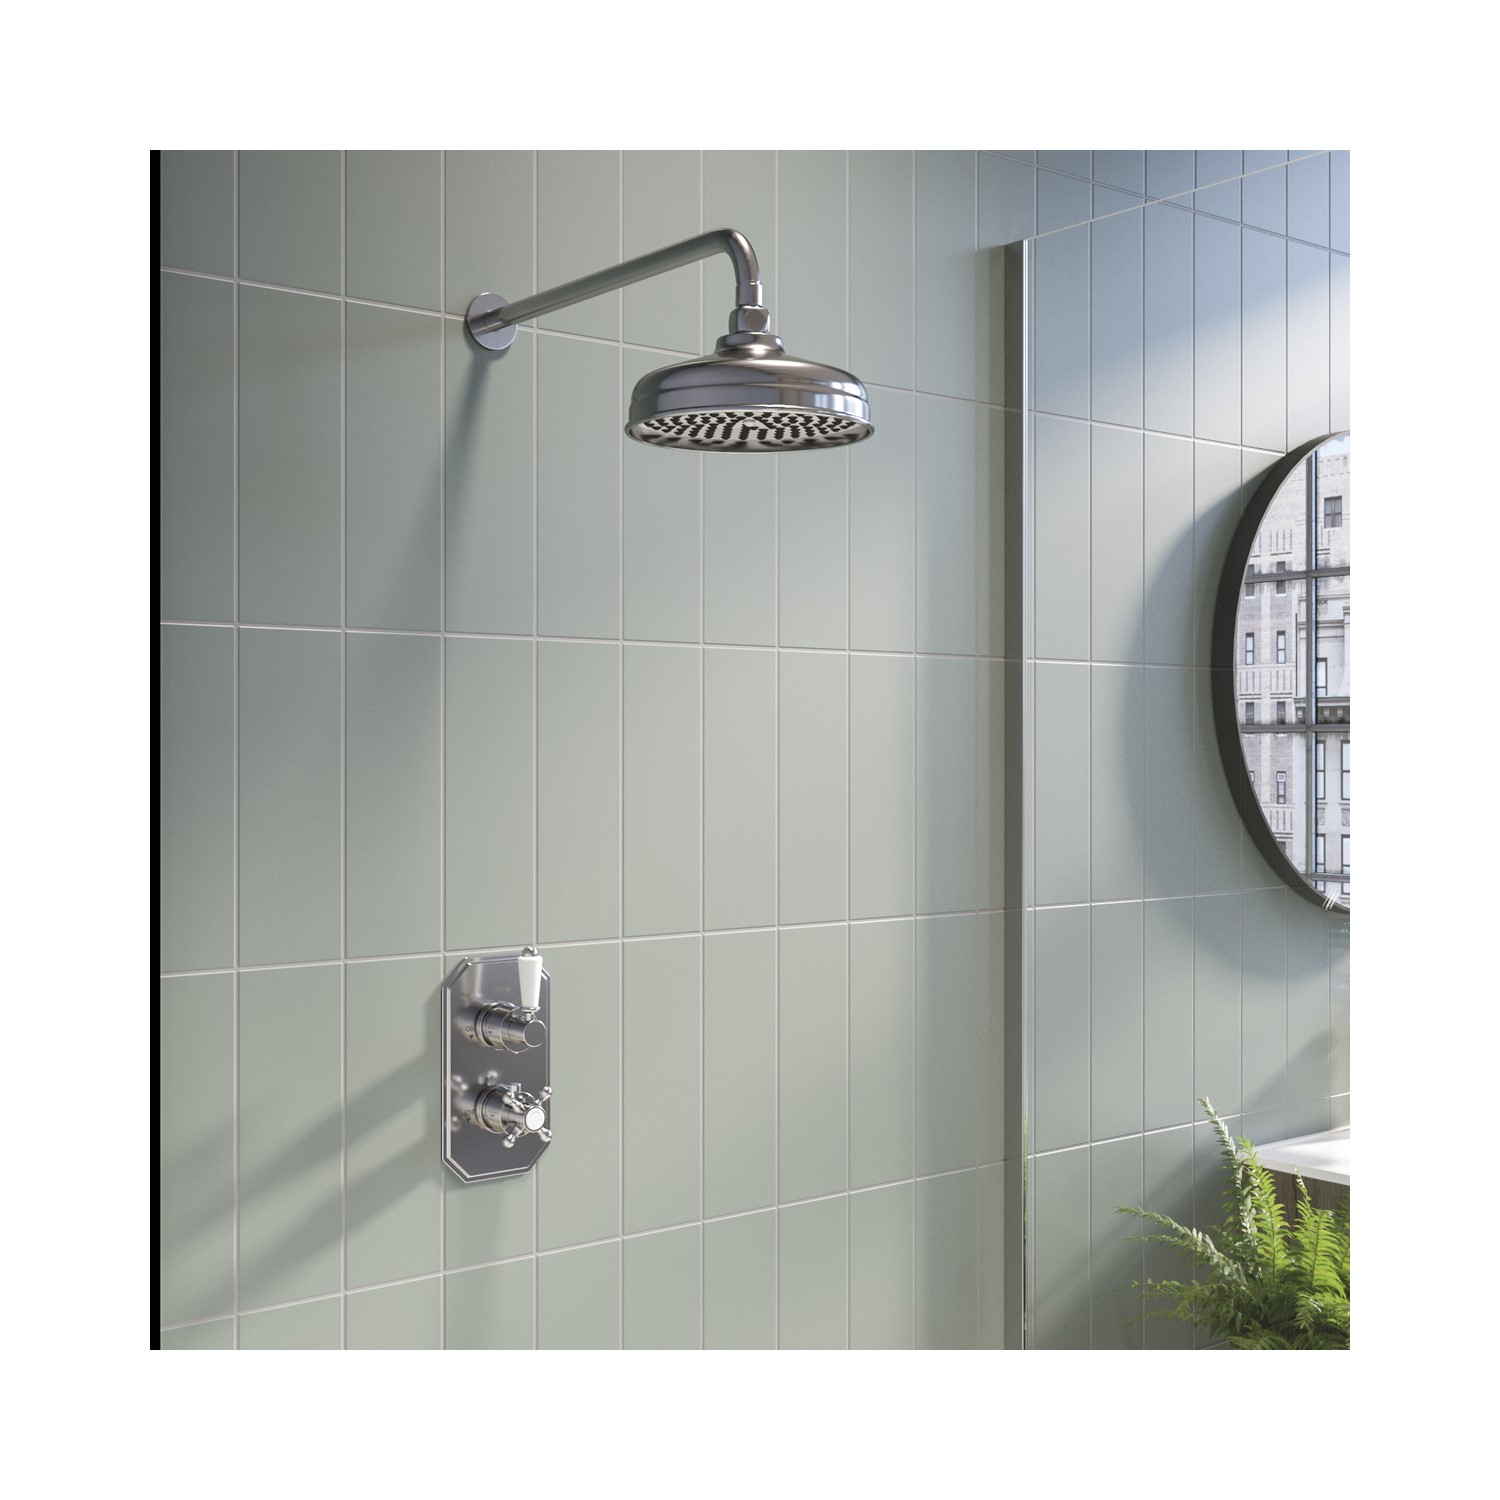 Traditional Concealed Thermostatic Mixer Shower with Wall Mounted Rainfall Shower Head - Cambridge